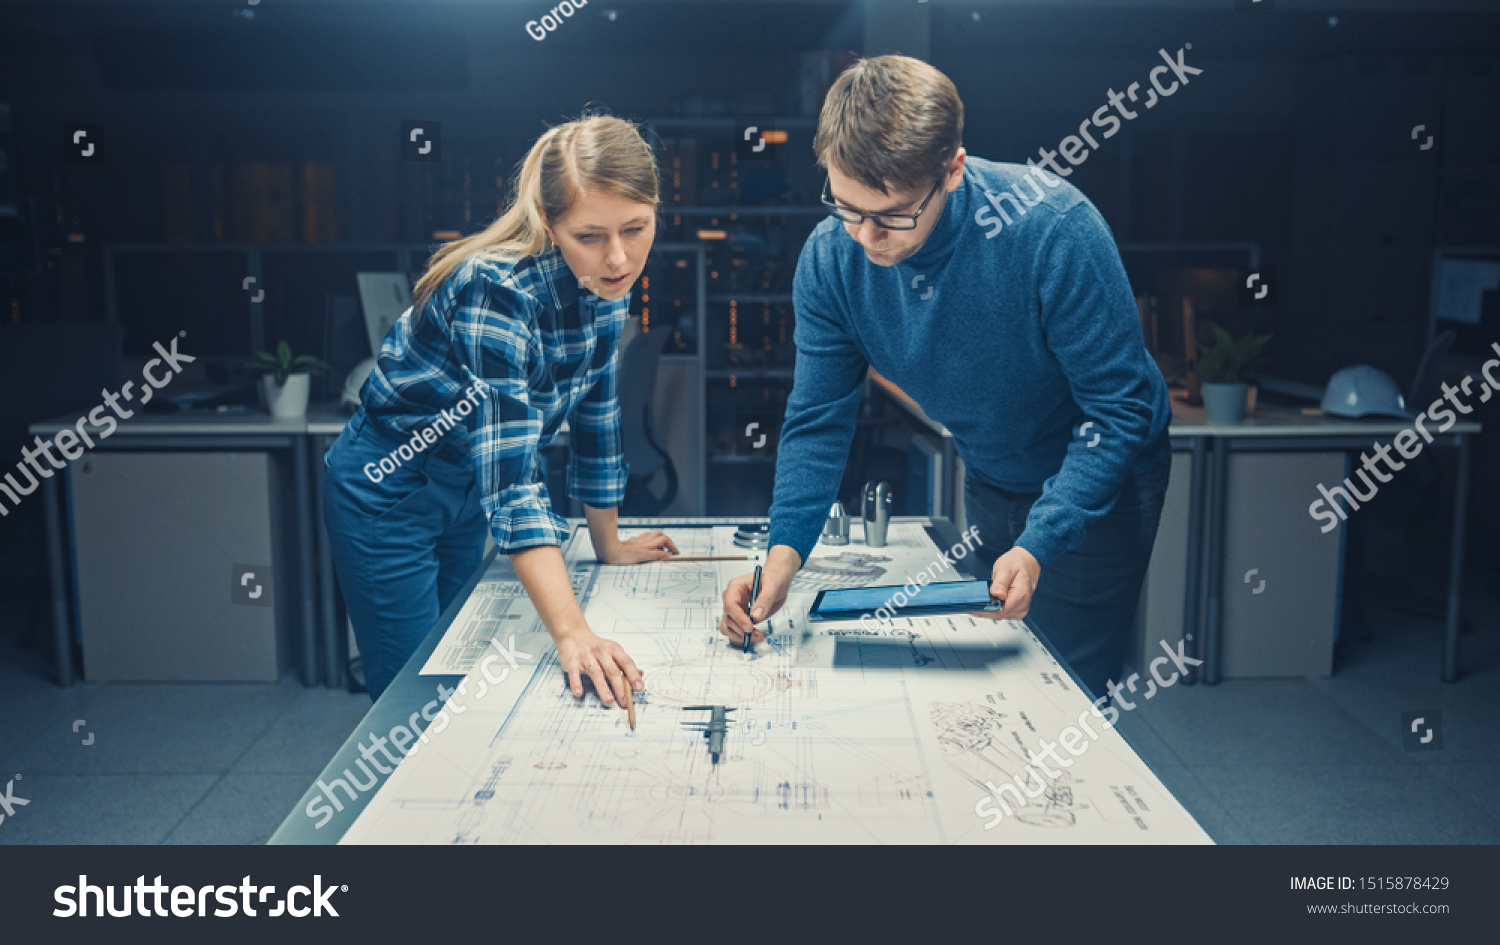 In the Dark Industrial Design Engineering Facility Male and Female Engineers Talk and Work on a Blueprints Using Conference Table. On the Desktop Drawings, Drafts and Electric Engine Components, Parts #1515878429